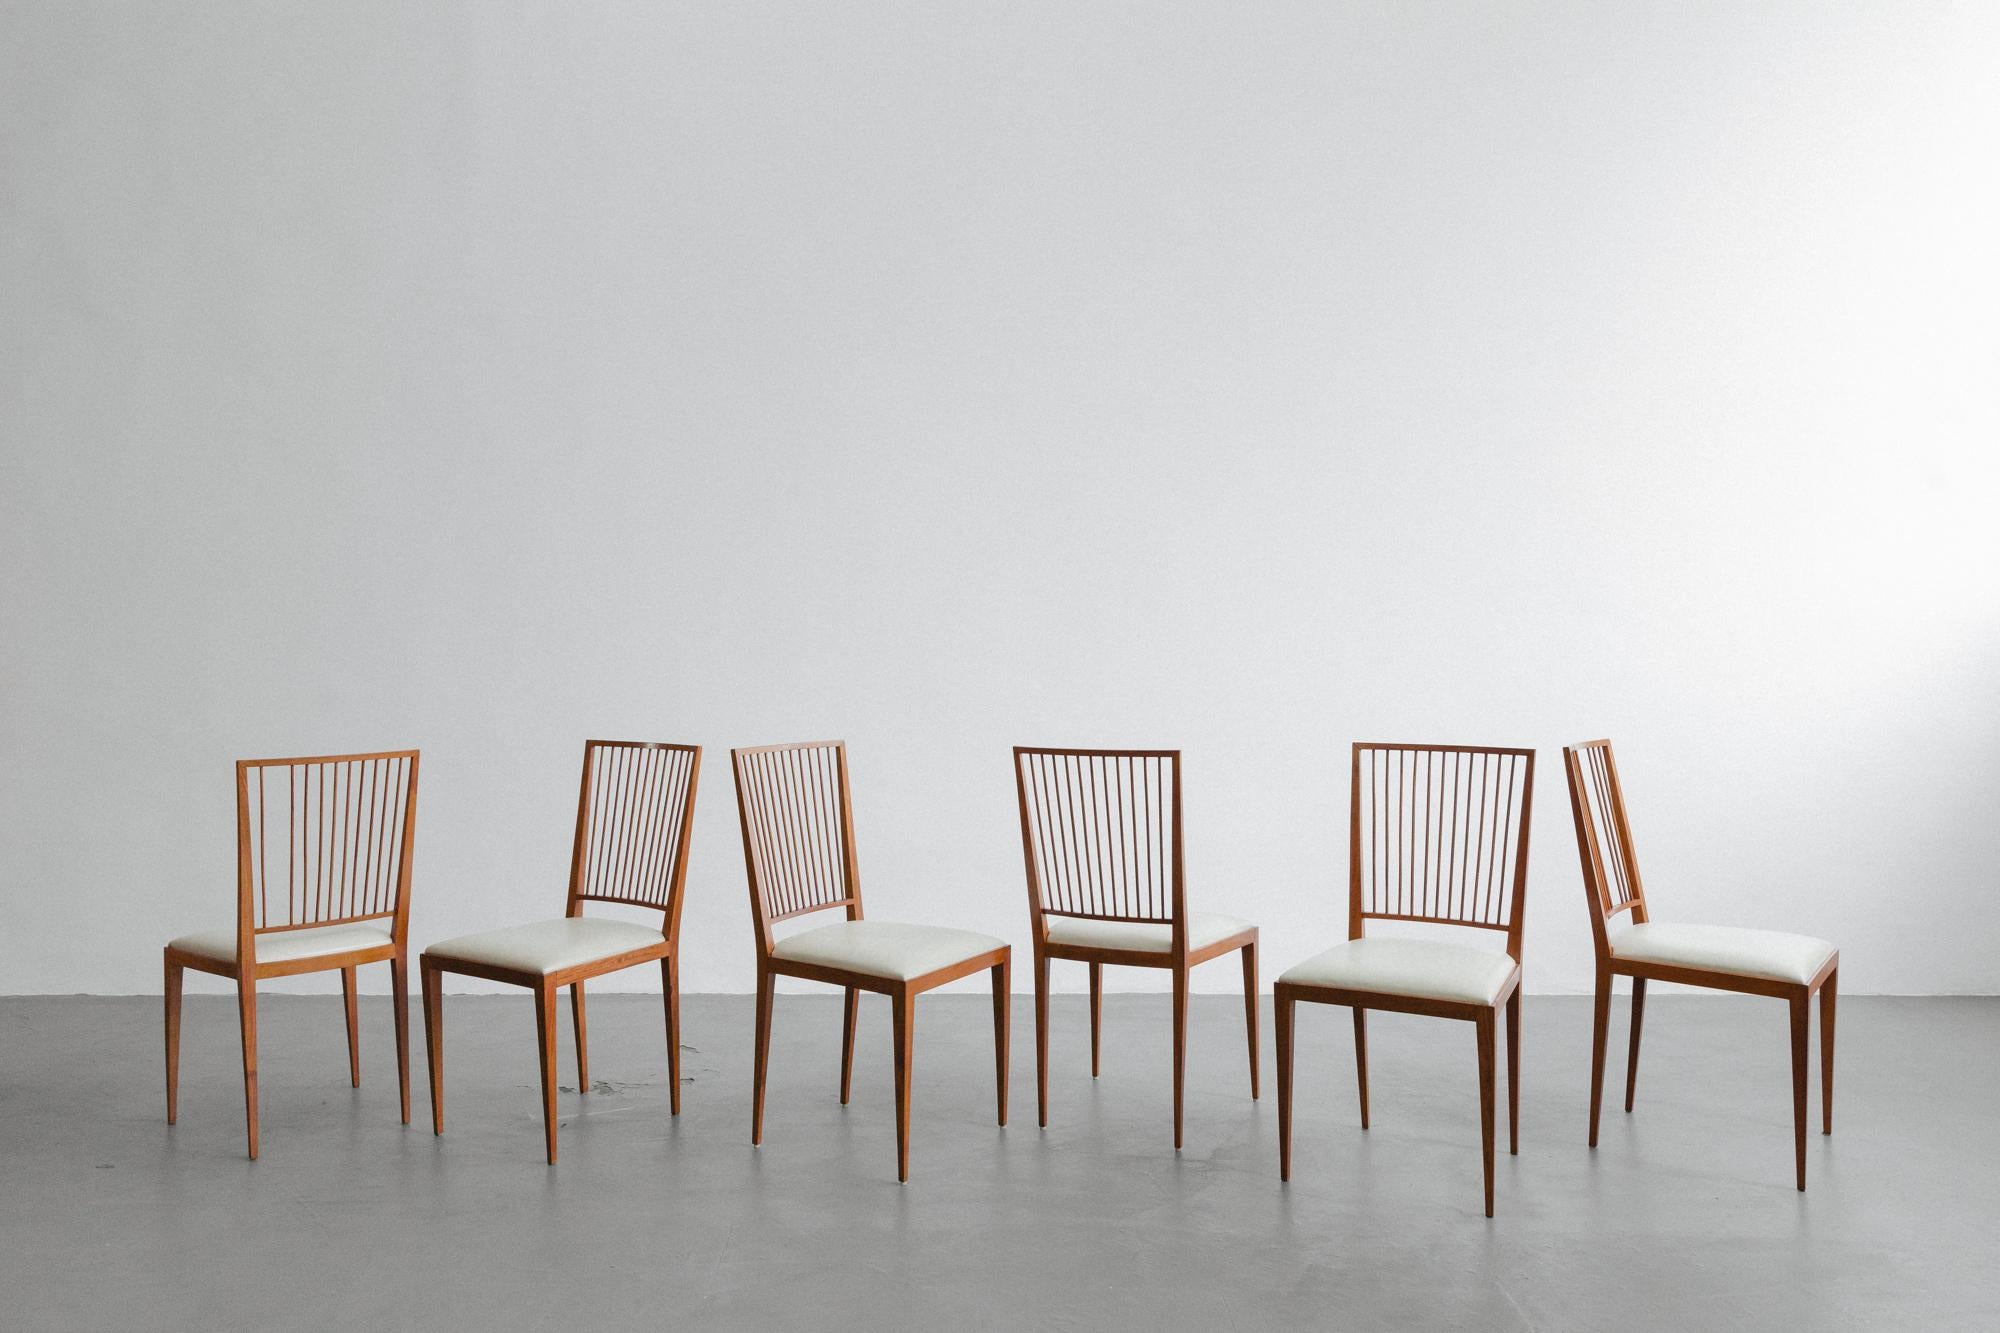 Set of 6 Chairs by Joaquim Tenreiro, 1947, Midcentury Design In Good Condition For Sale In New York, NY